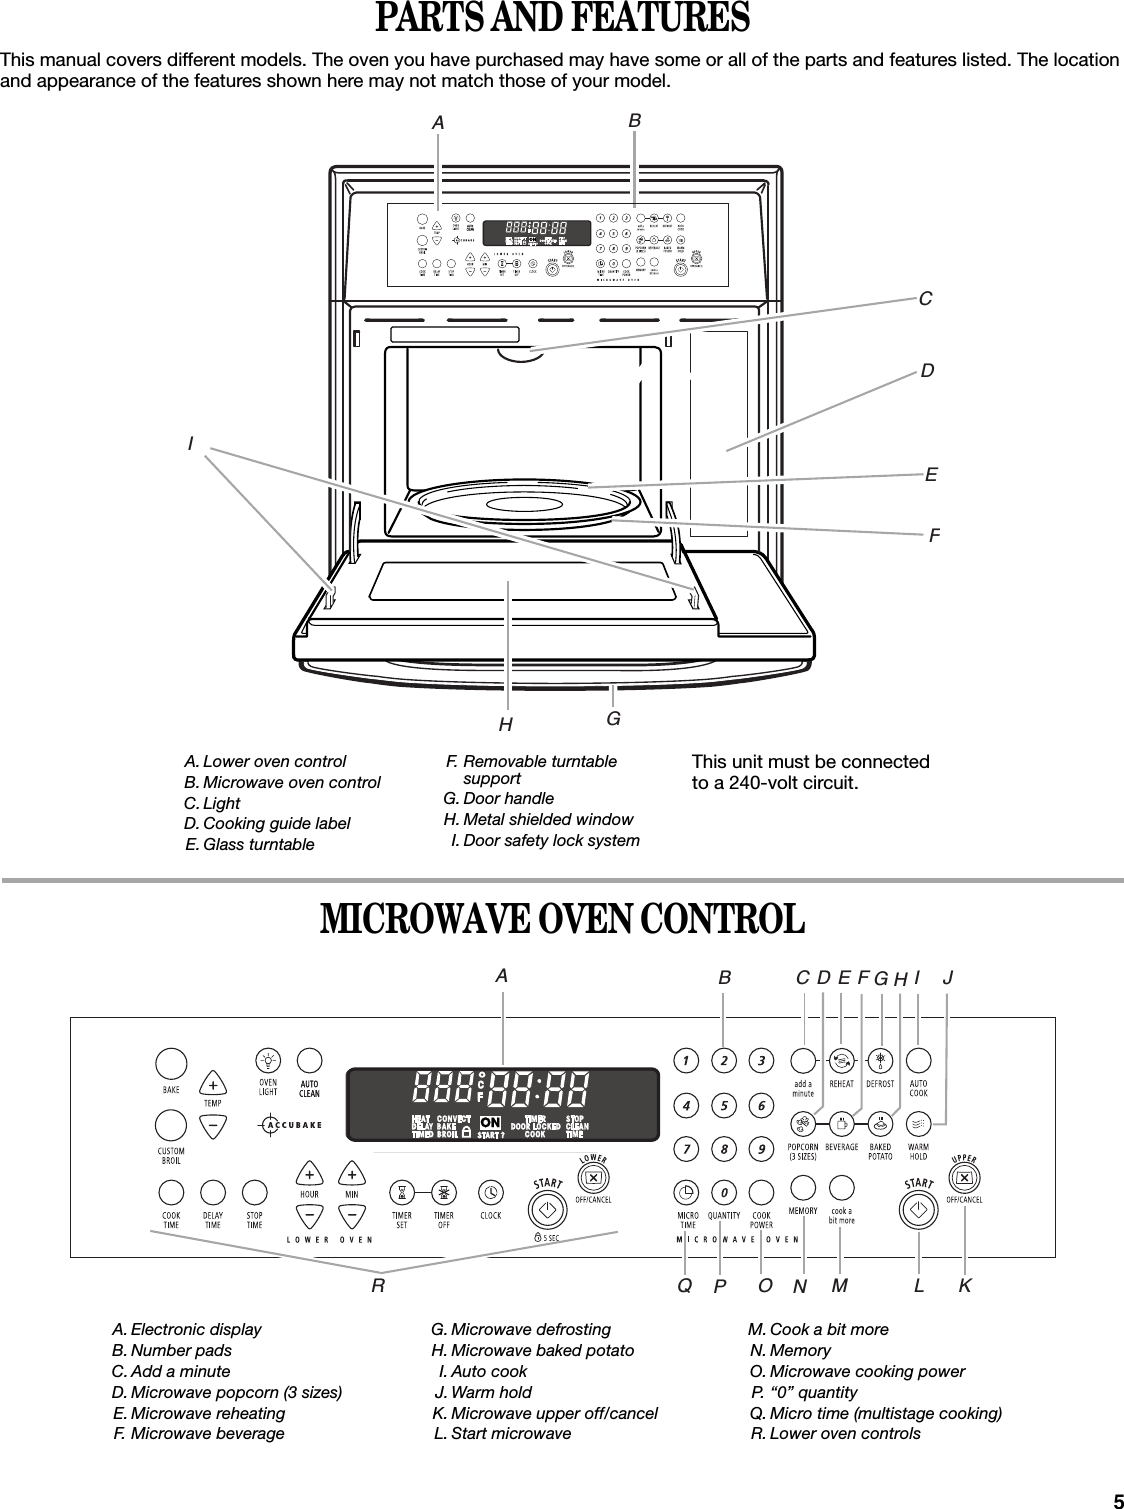 5PARTS AND FEATURESThis manual covers different models. The oven you have purchased may have some or all of the parts and features listed. The location and appearance of the features shown here may not match those of your model.MICROWAVE OVEN CONTROLA. Lower oven controlB. Microwave oven controlC.LightD. Cooking guide labelE. Glass turntableF. Removable turntable supportG. Door handleH. Metal shielded windowI. Door safety lock systemThis unit must be connected to a 240-volt circuit.A. Electronic displayB. Number padsC. Add a minuteD. Microwave popcorn (3 sizes)E. Microwave reheatingF. Microwave beverage G. Microwave defrostingH. Microwave baked potatoI. Auto cookJ. Warm hold K. Microwave upper off/cancel L. Start microwaveM. Cook a bit moreN. MemoryO. Microwave cooking powerP. “0” quantityQ. Micro time (multistage cooking)R. Lower oven controlsIBCDEFGHAFBCEGHJKDAILMNOPQR